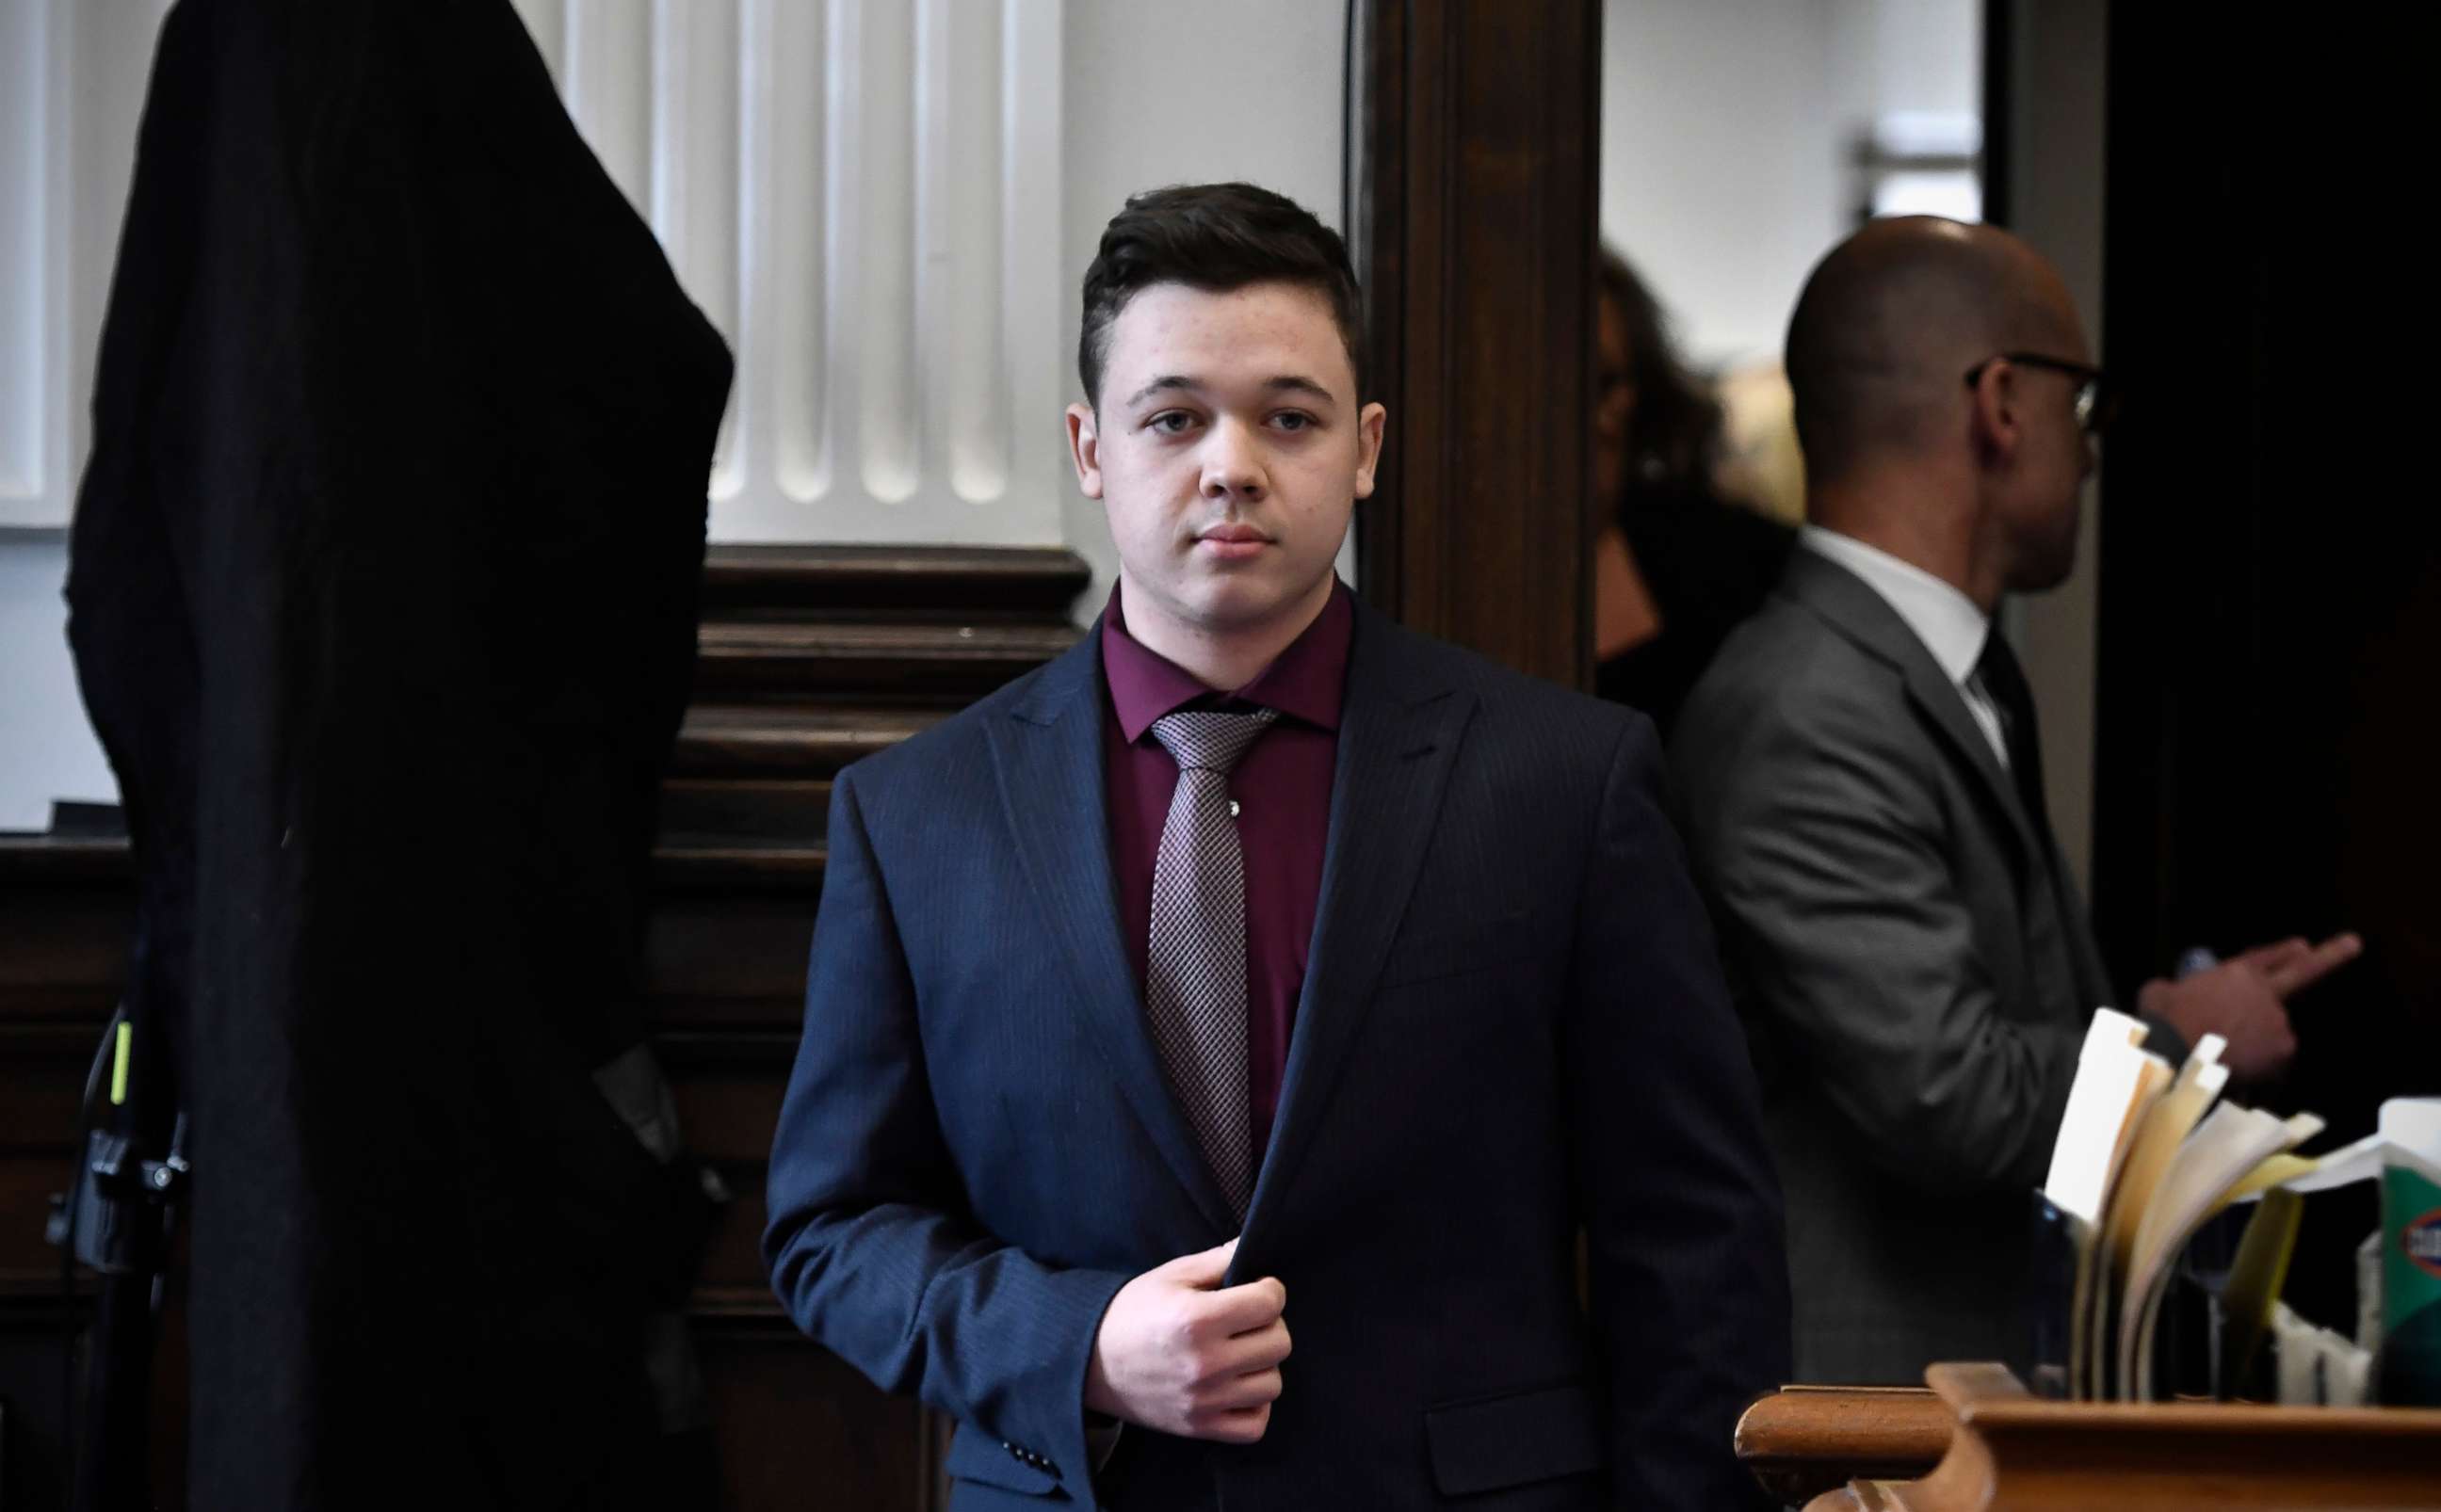 PHOTO: Kyle Rittenhouse enters the courtroom to hear the verdicts in his trial prior to being found not guilty on all counts at the Kenosha County Courthouse on Nov. 19, 2021 in Kenosha, Wisconsin.